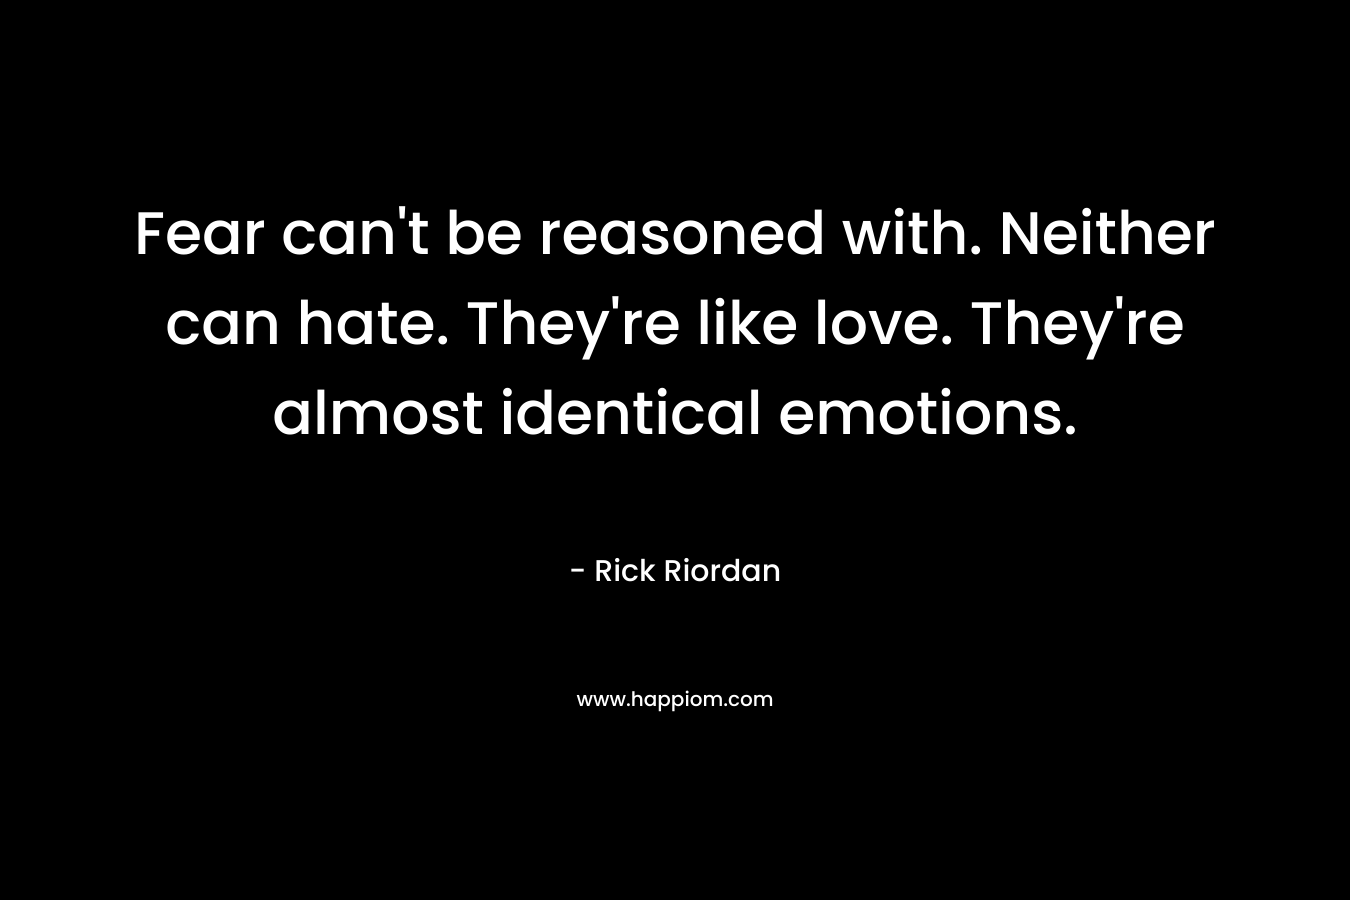 Fear can't be reasoned with. Neither can hate. They're like love. They're almost identical emotions.